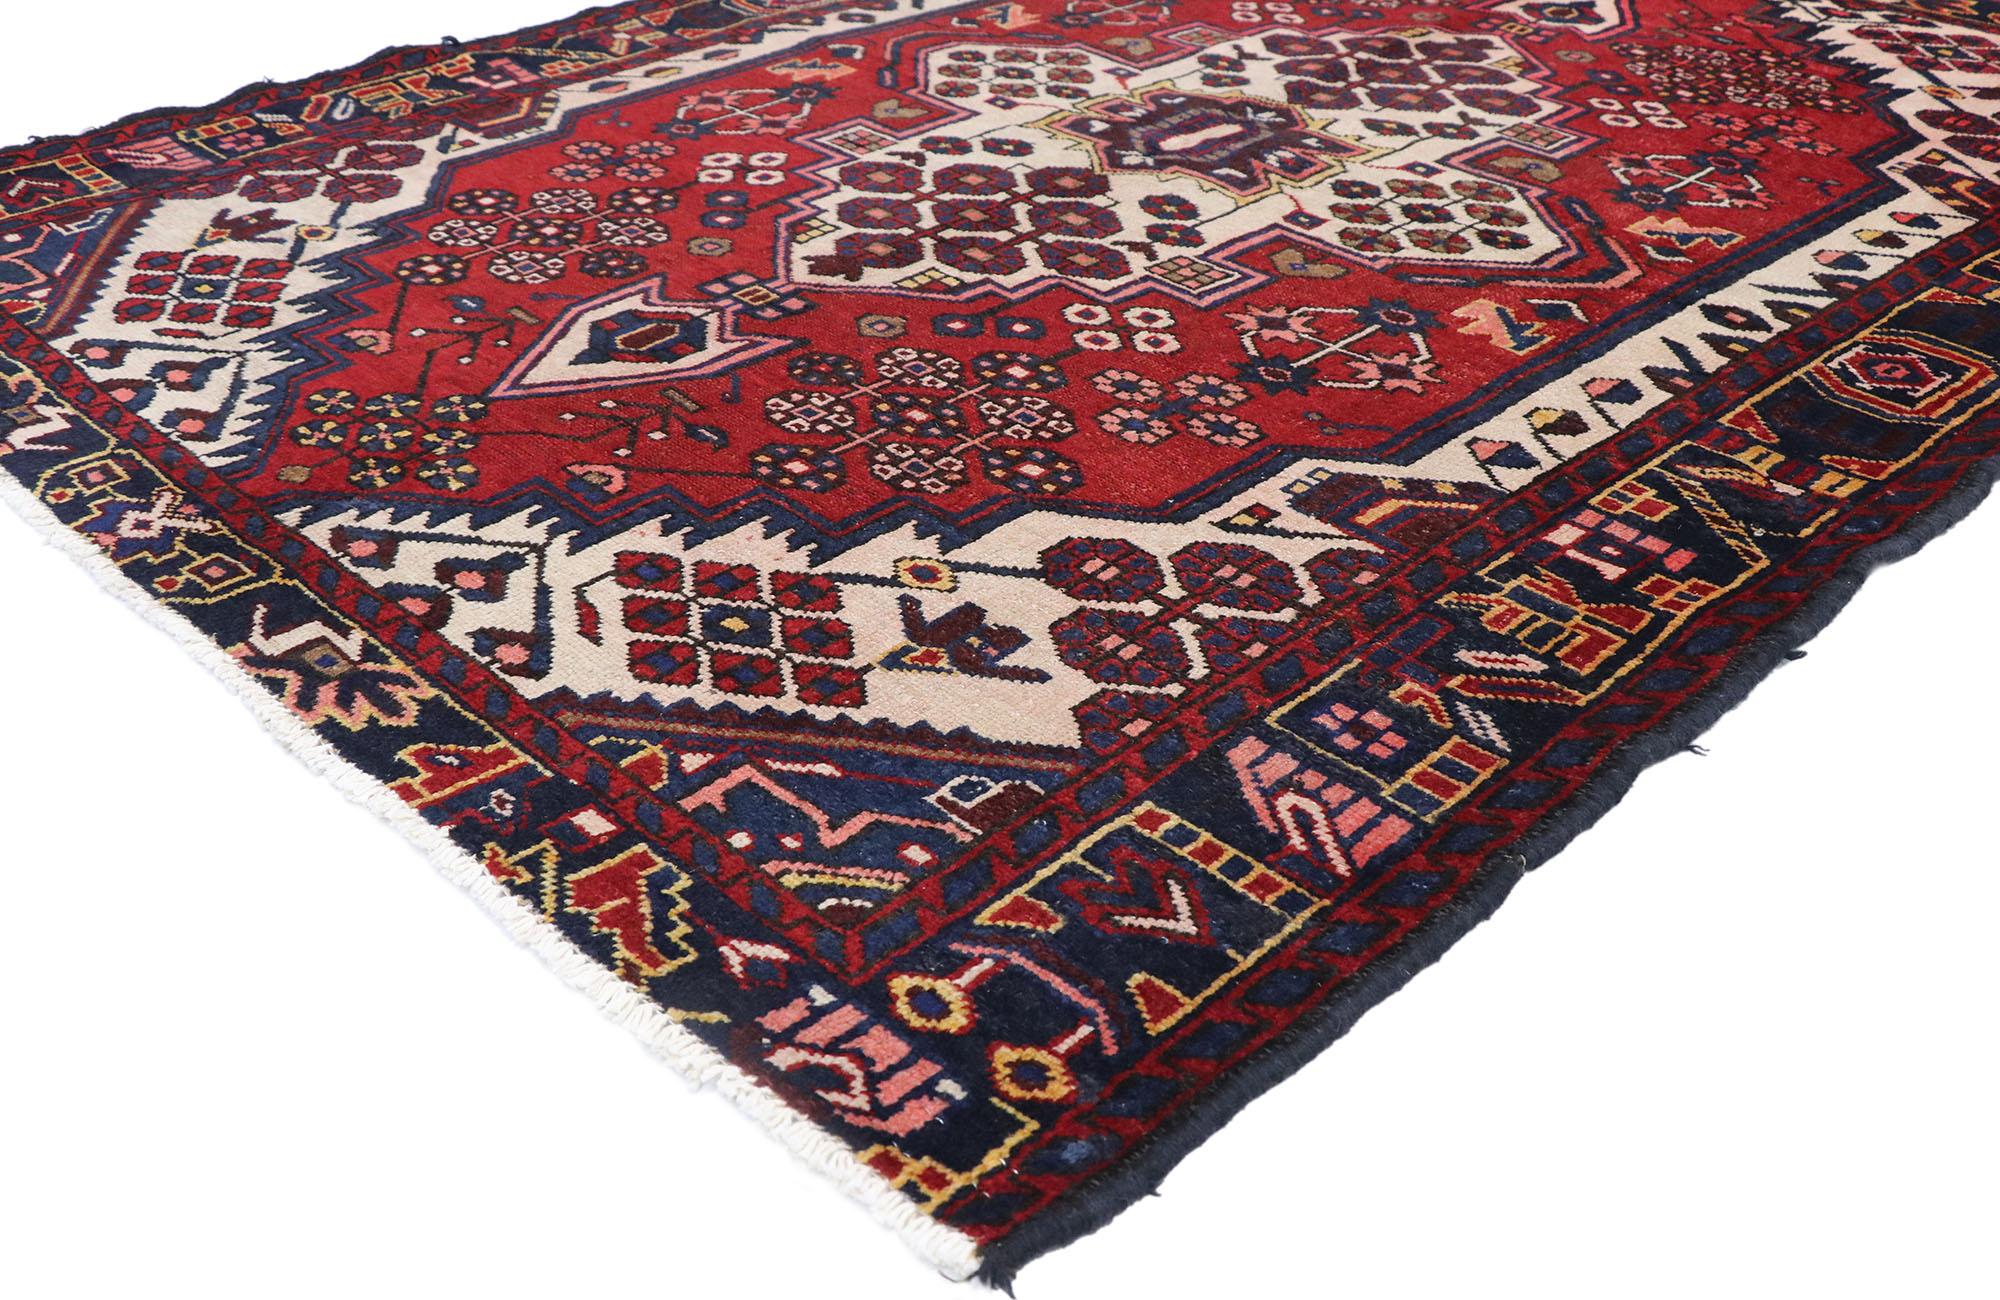 77713 vintage Persian Hamadan rug with Jacobean style 04'07 x 06'01. With its red hues and beguiling beauty, this hand-knotted wool vintage Persian Hamadan rug will take on a curated lived-in look that feels timeless while imparting a sense of